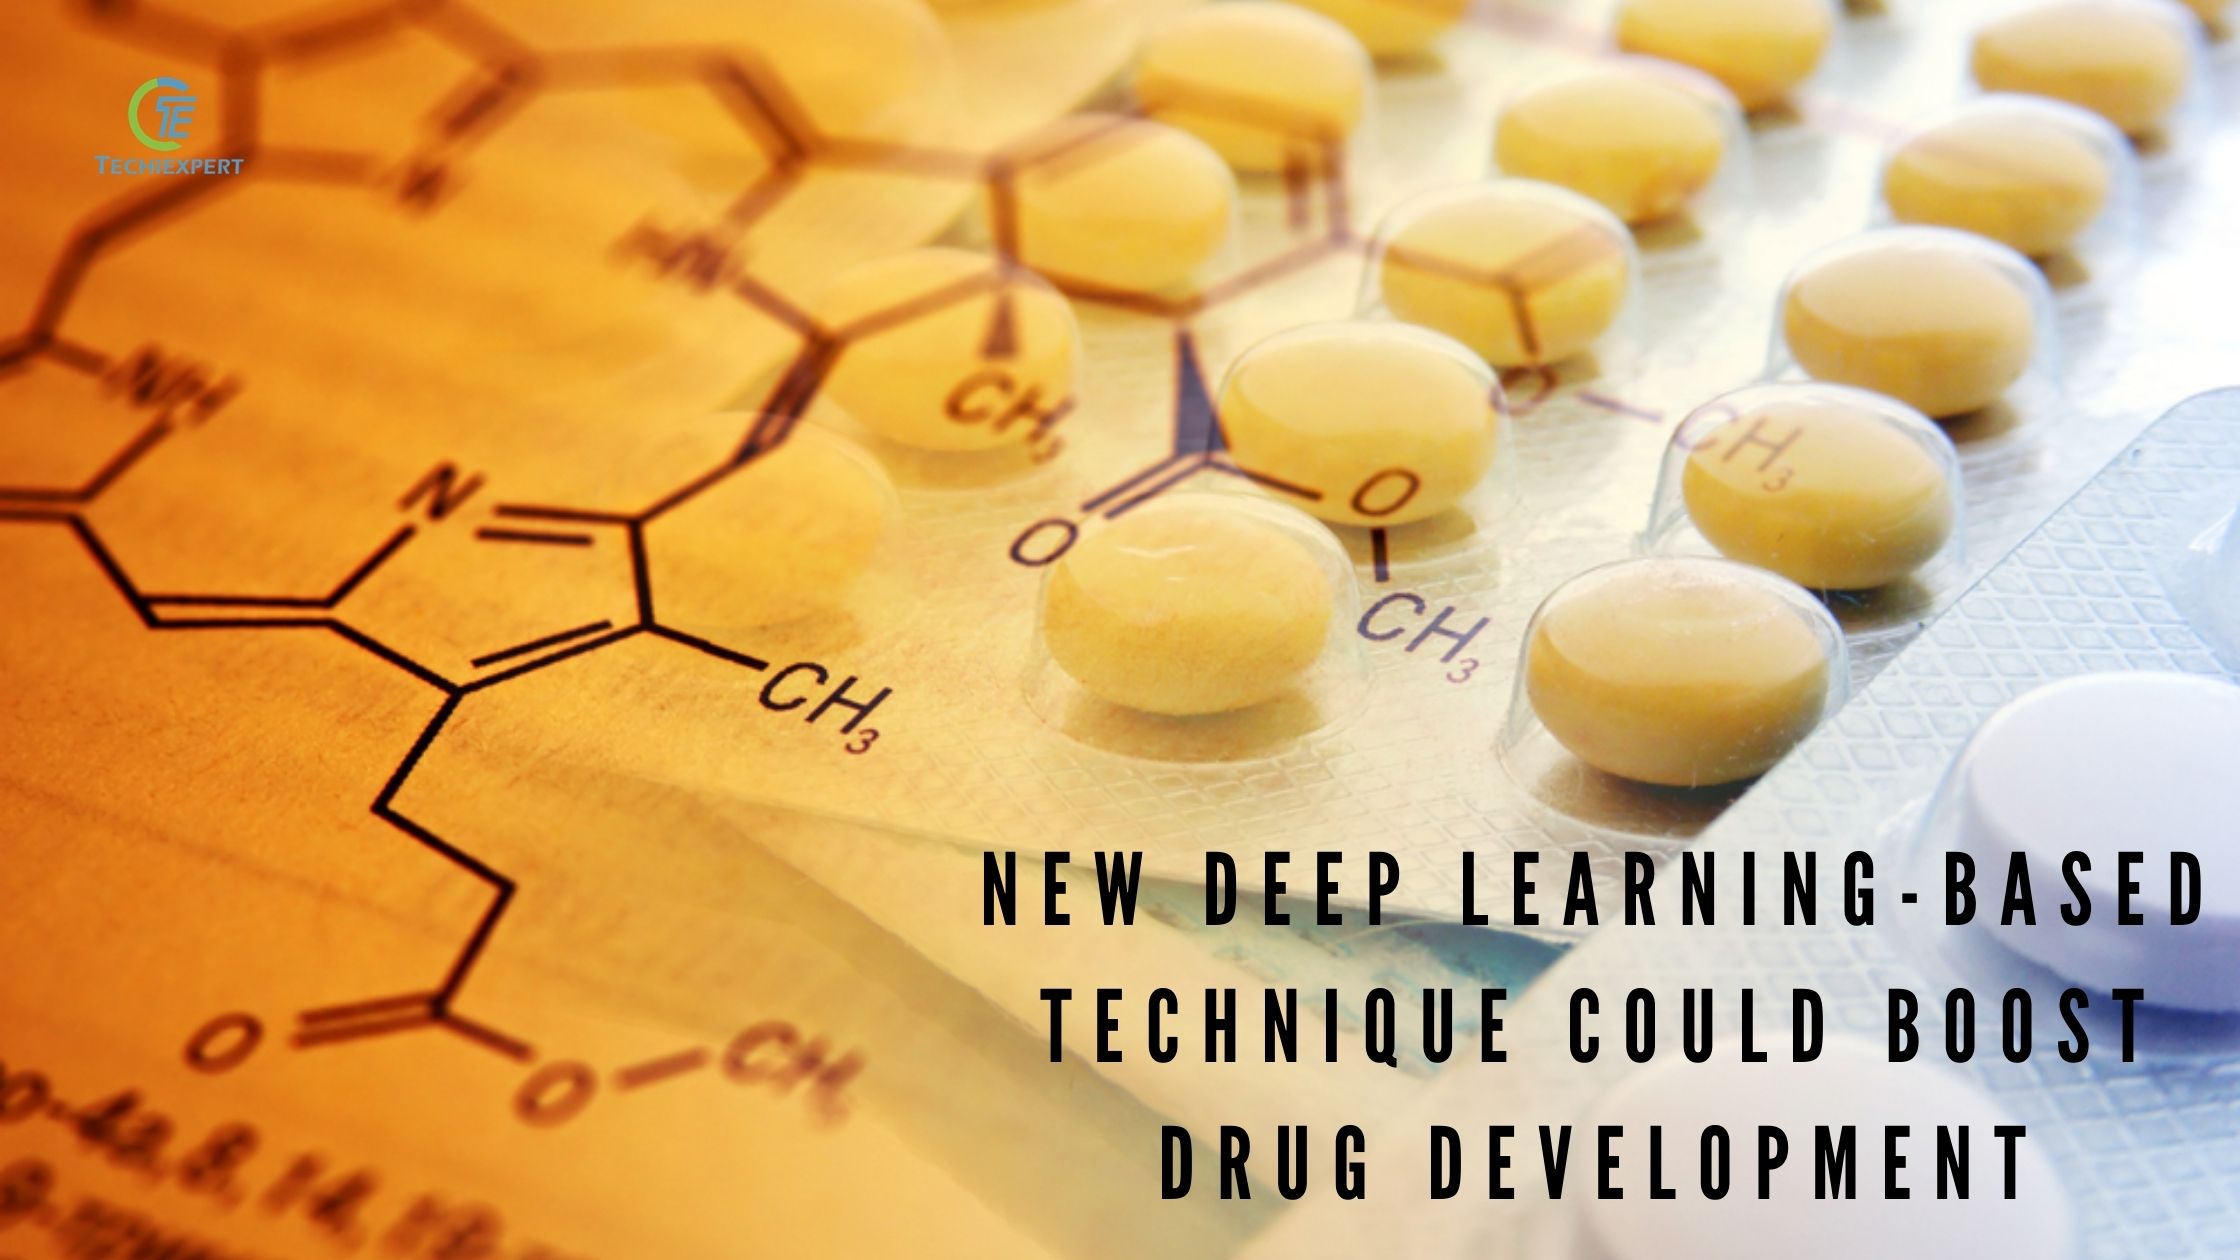 New deep learning-based technique could boost drug development